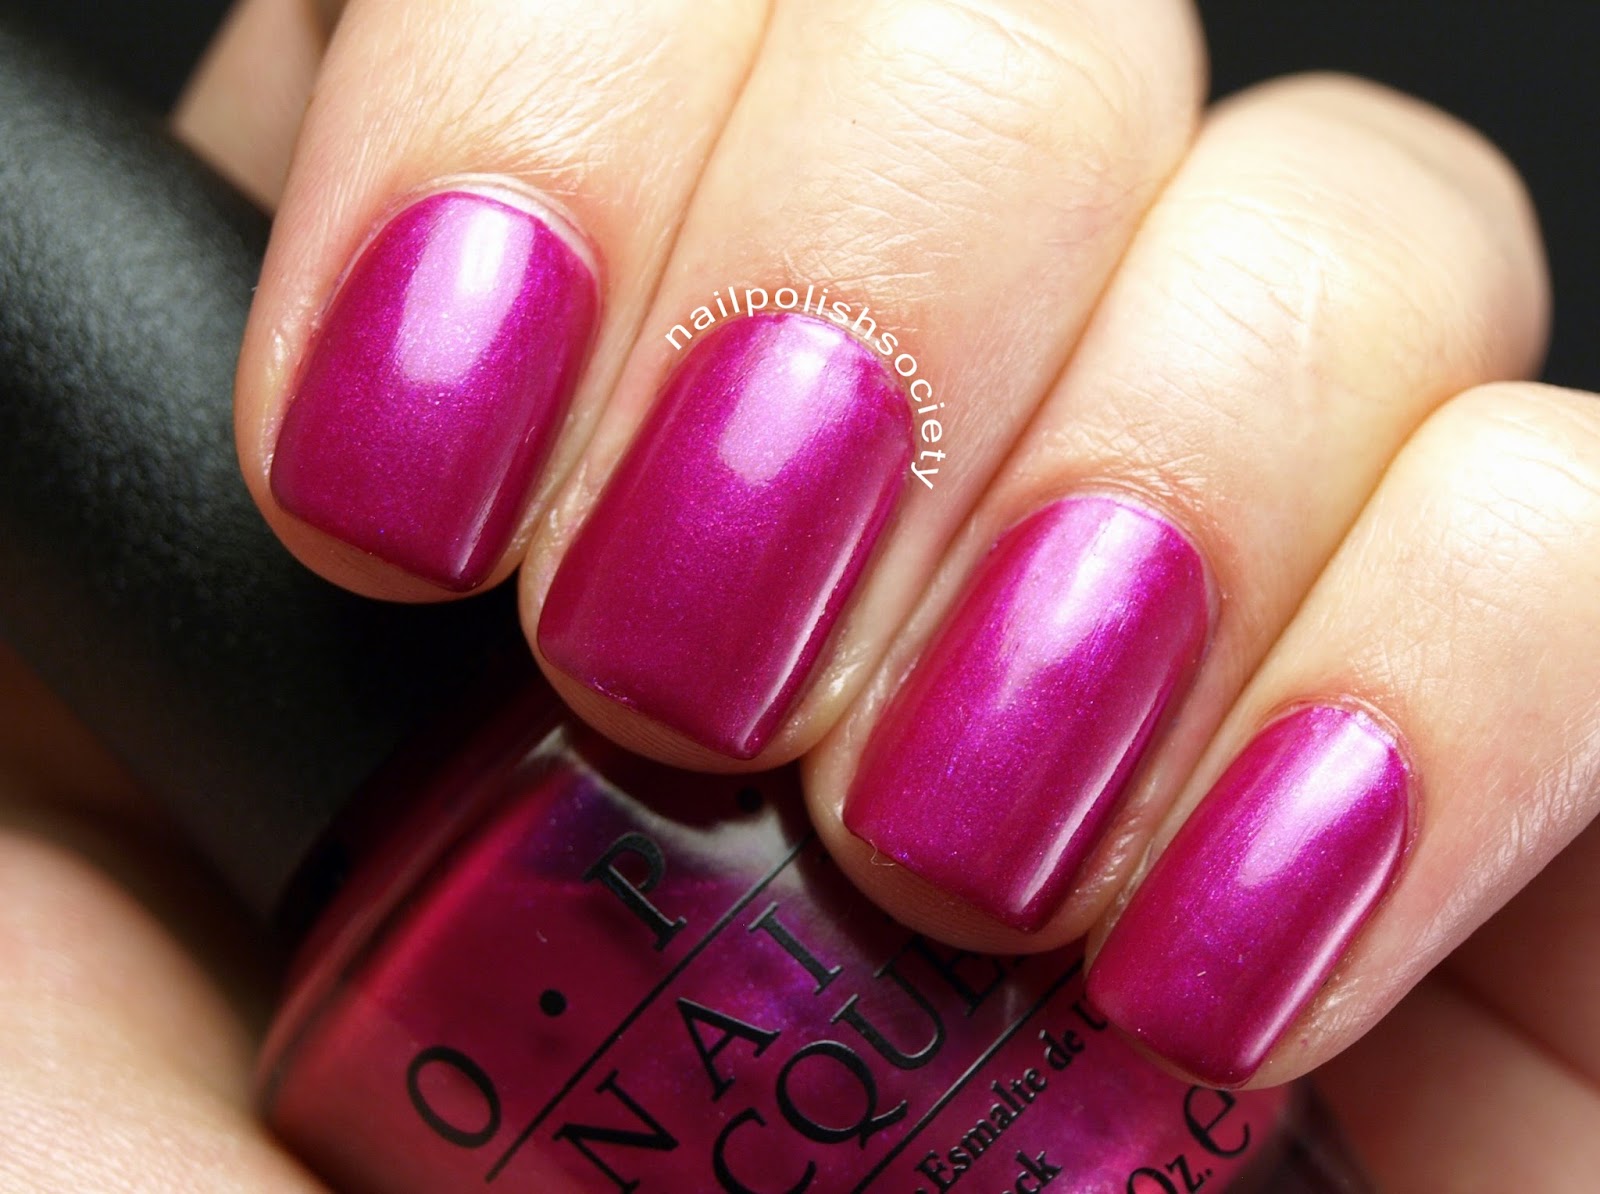 7. Sinful Colors Acid Test Nail Polish in "Fuchsia Fever" - wide 7